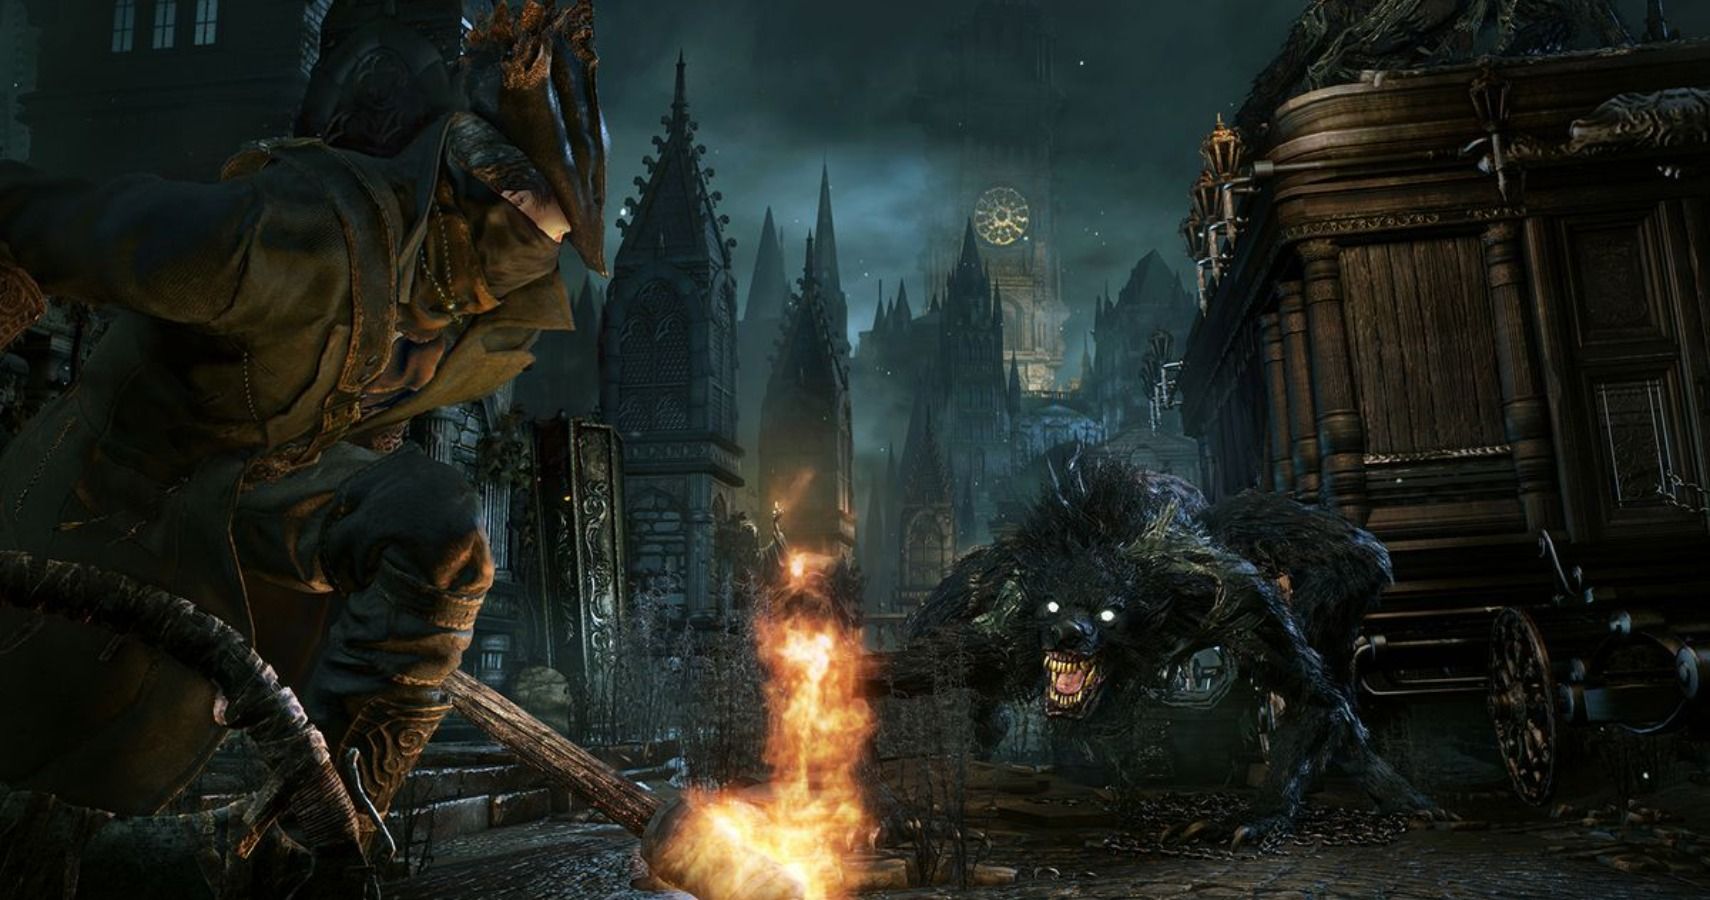 Bloodborne Is Still The Best Souls Game, And It's Not Even Close